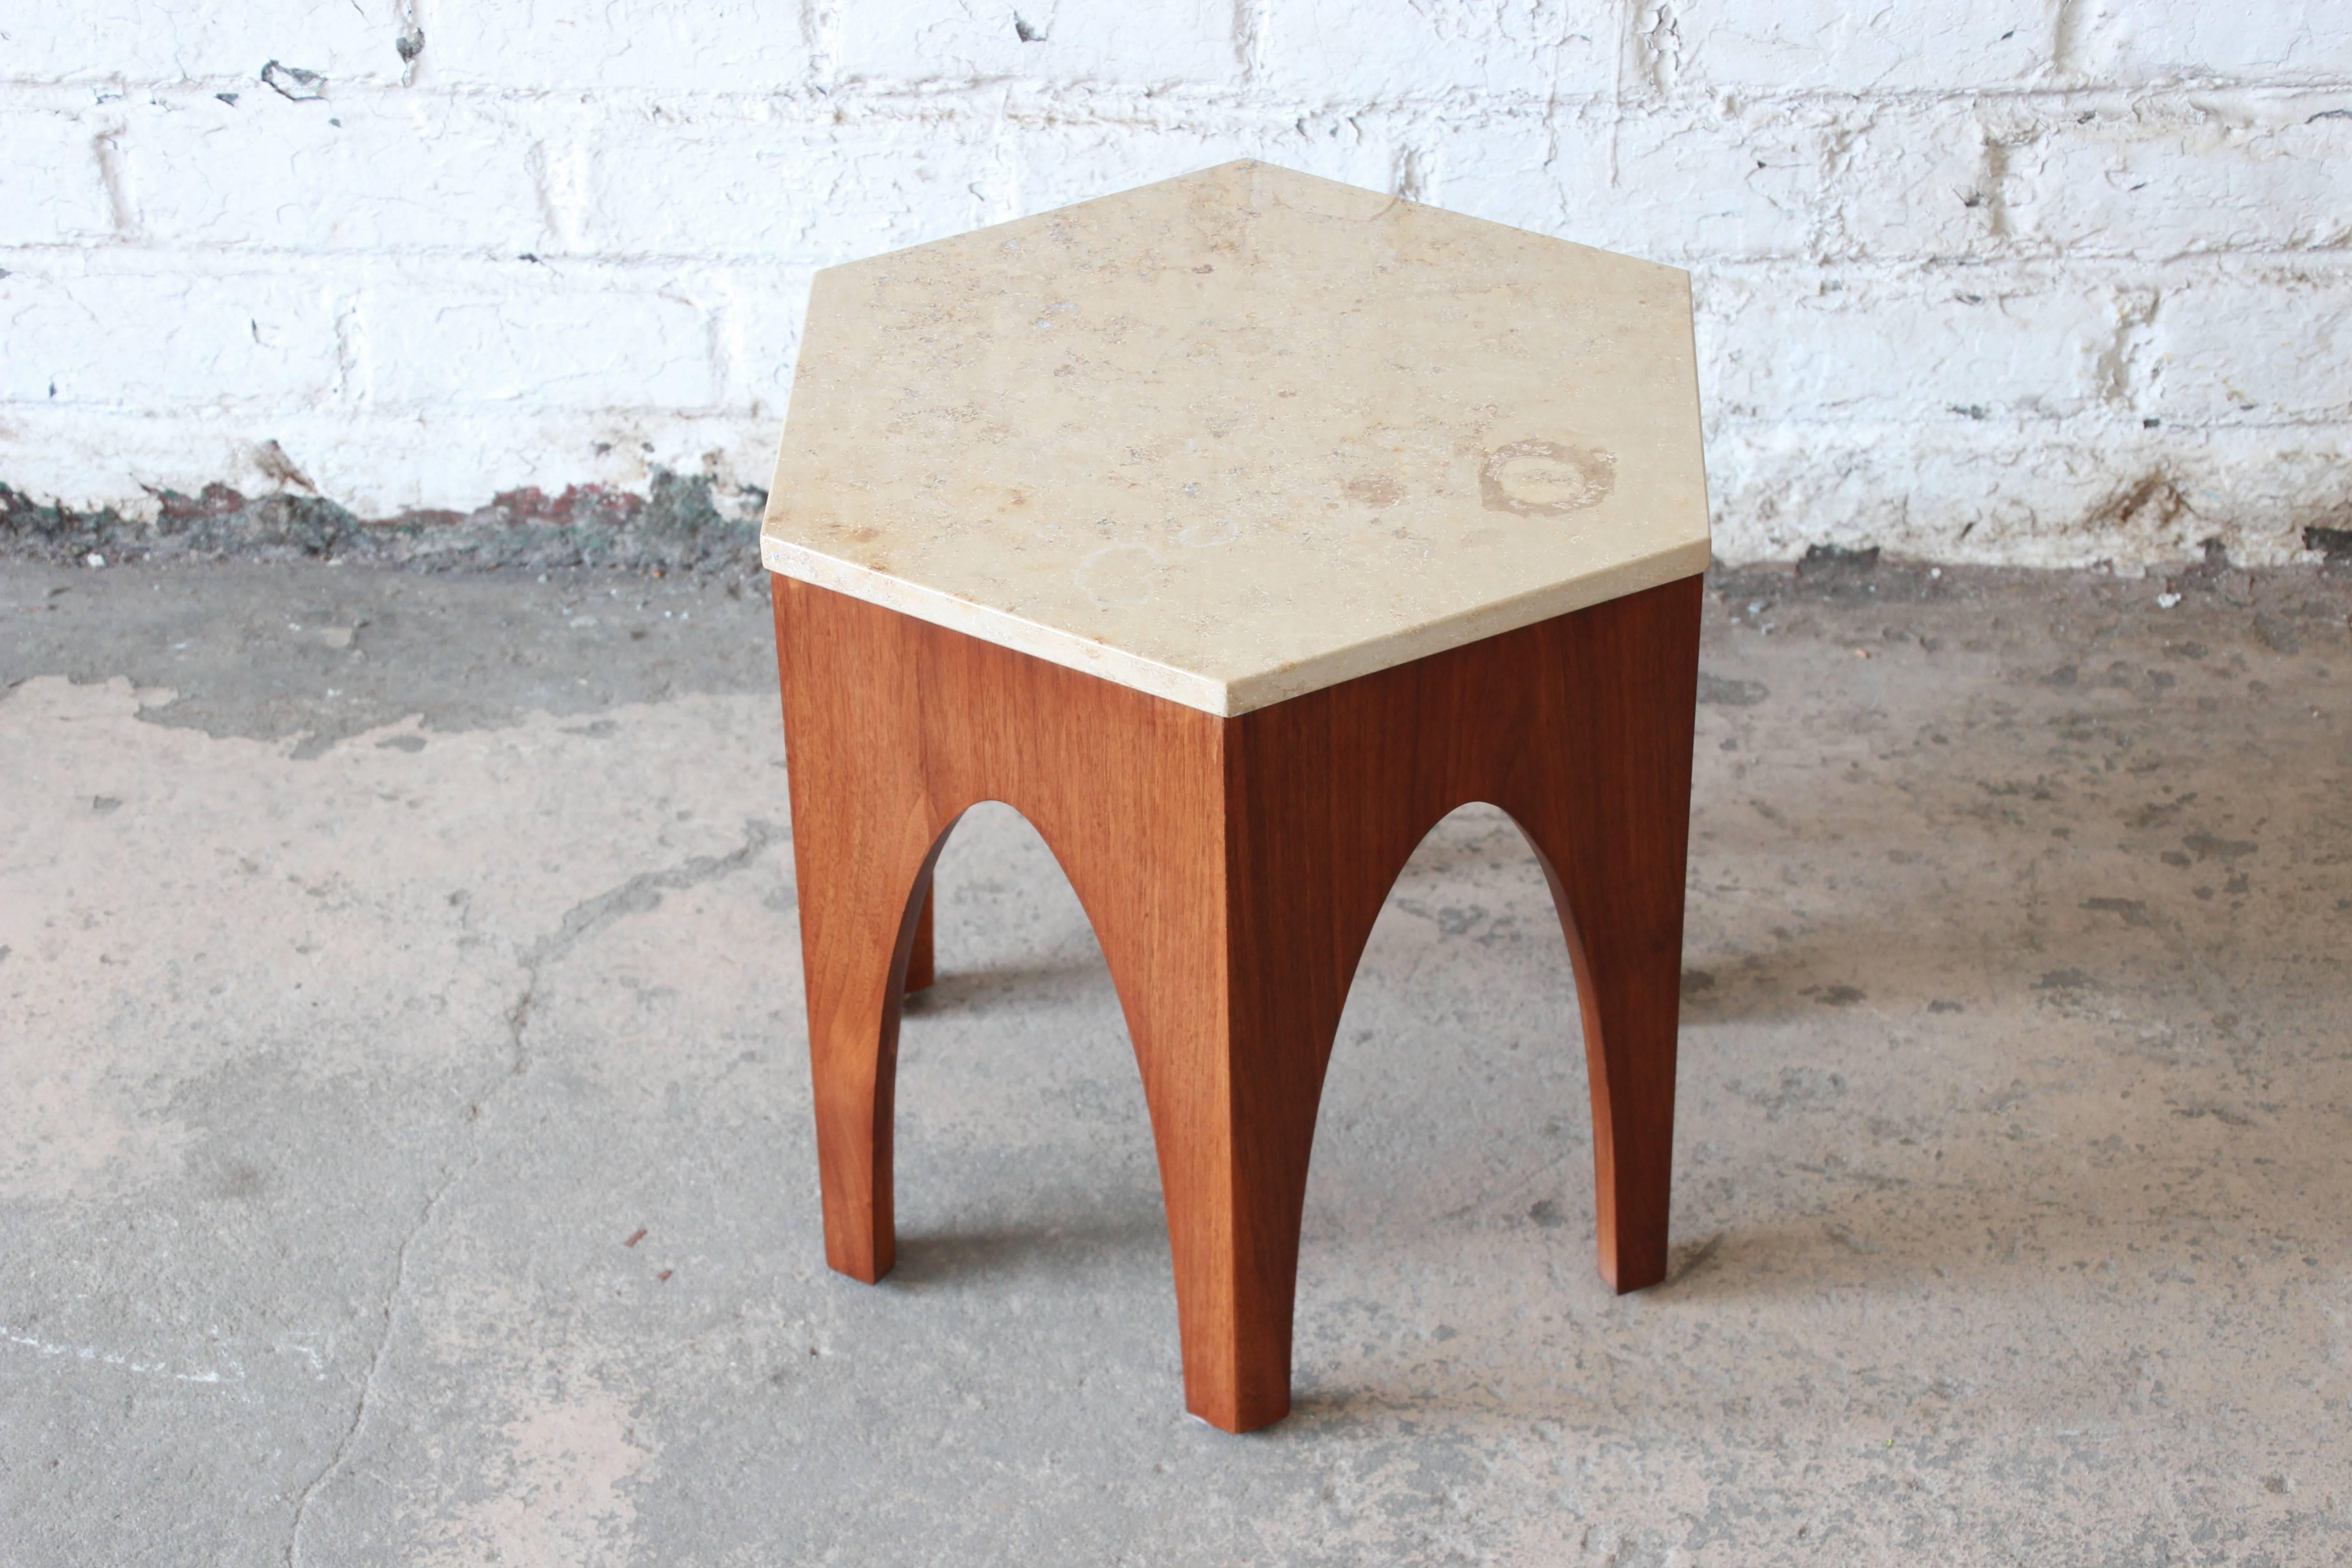 A beautiful Mid-Century Modern hexagon end or occasional table attributed to Harvey Probber. The table features an Italian travertine inset top over a sculpted walnut base with Moroccan inspired arches. It is finished on all sides and could also be